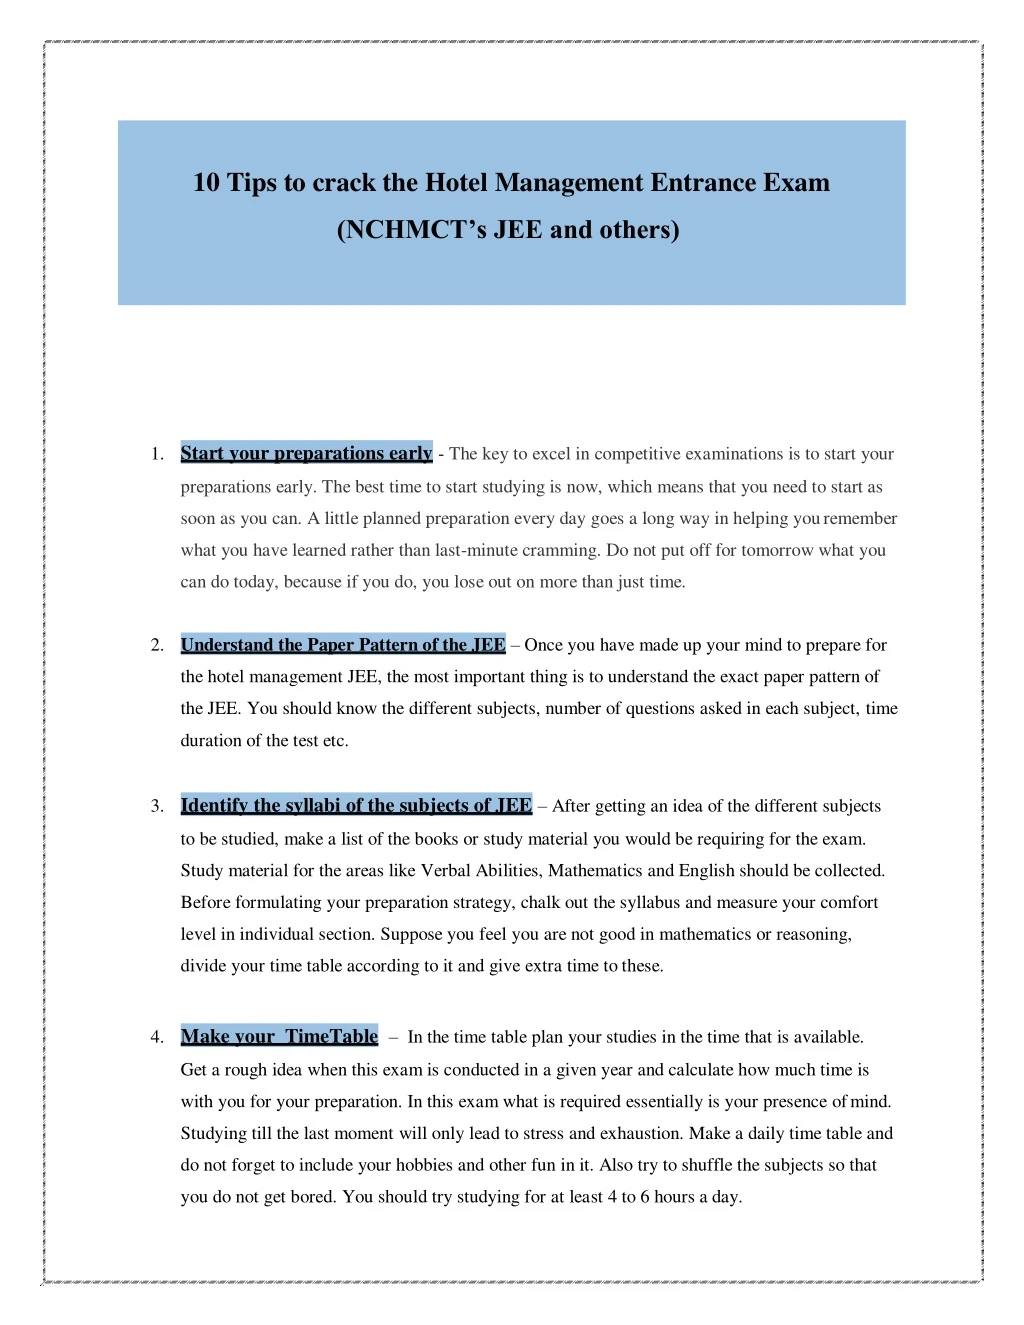 10 tips to crack the hotel management entrance